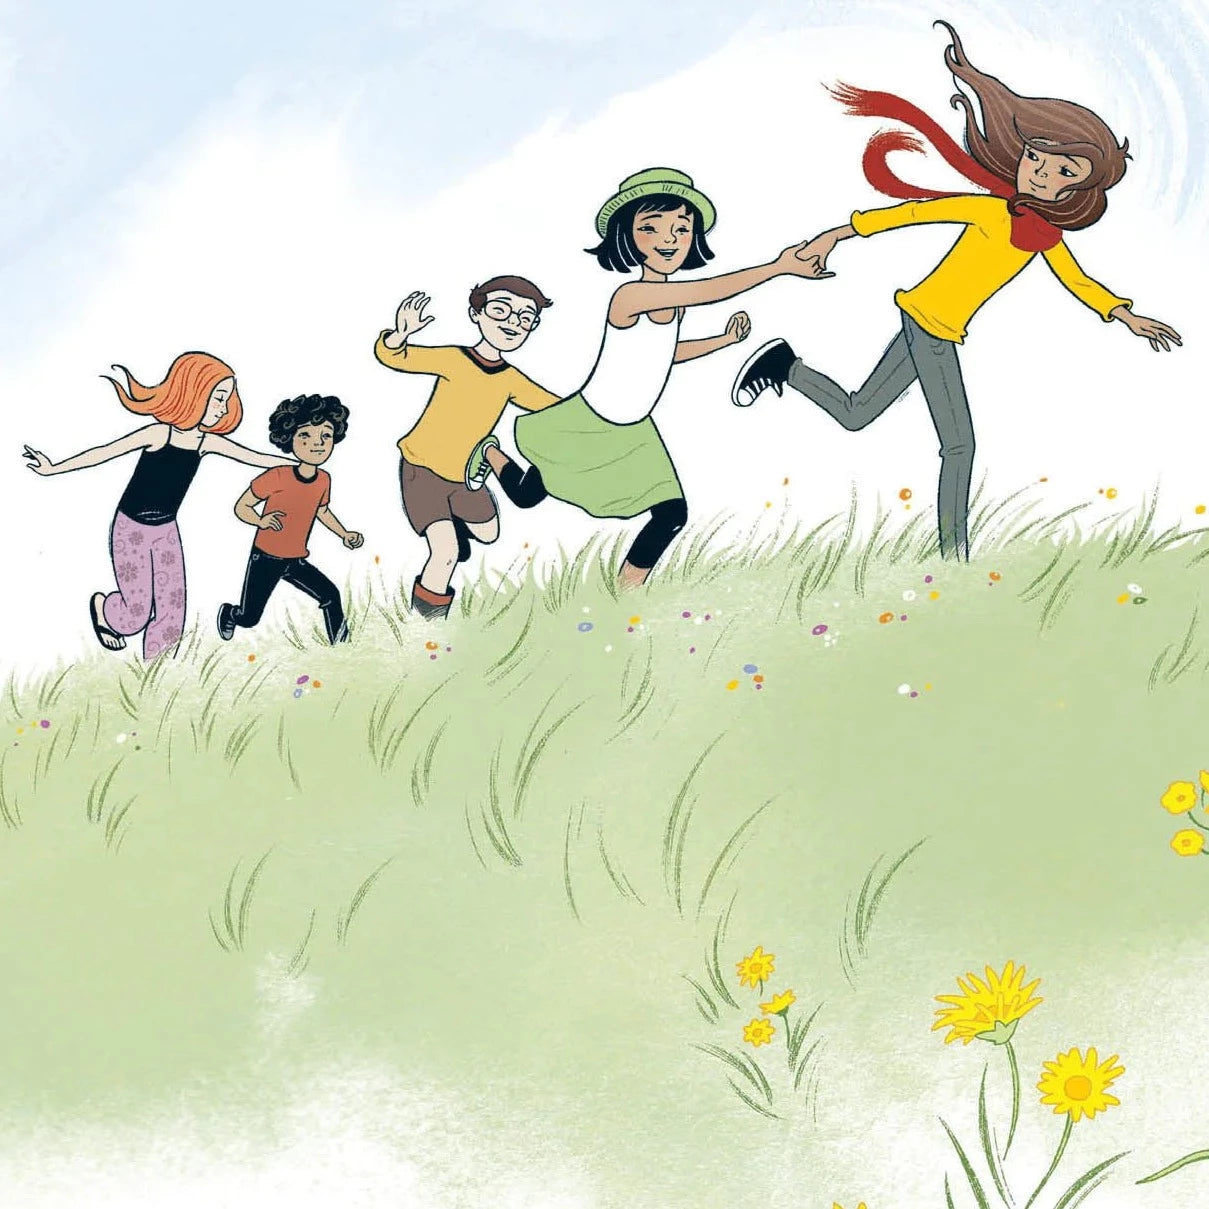 Picture of Aroha running along with four friends in a meadow.